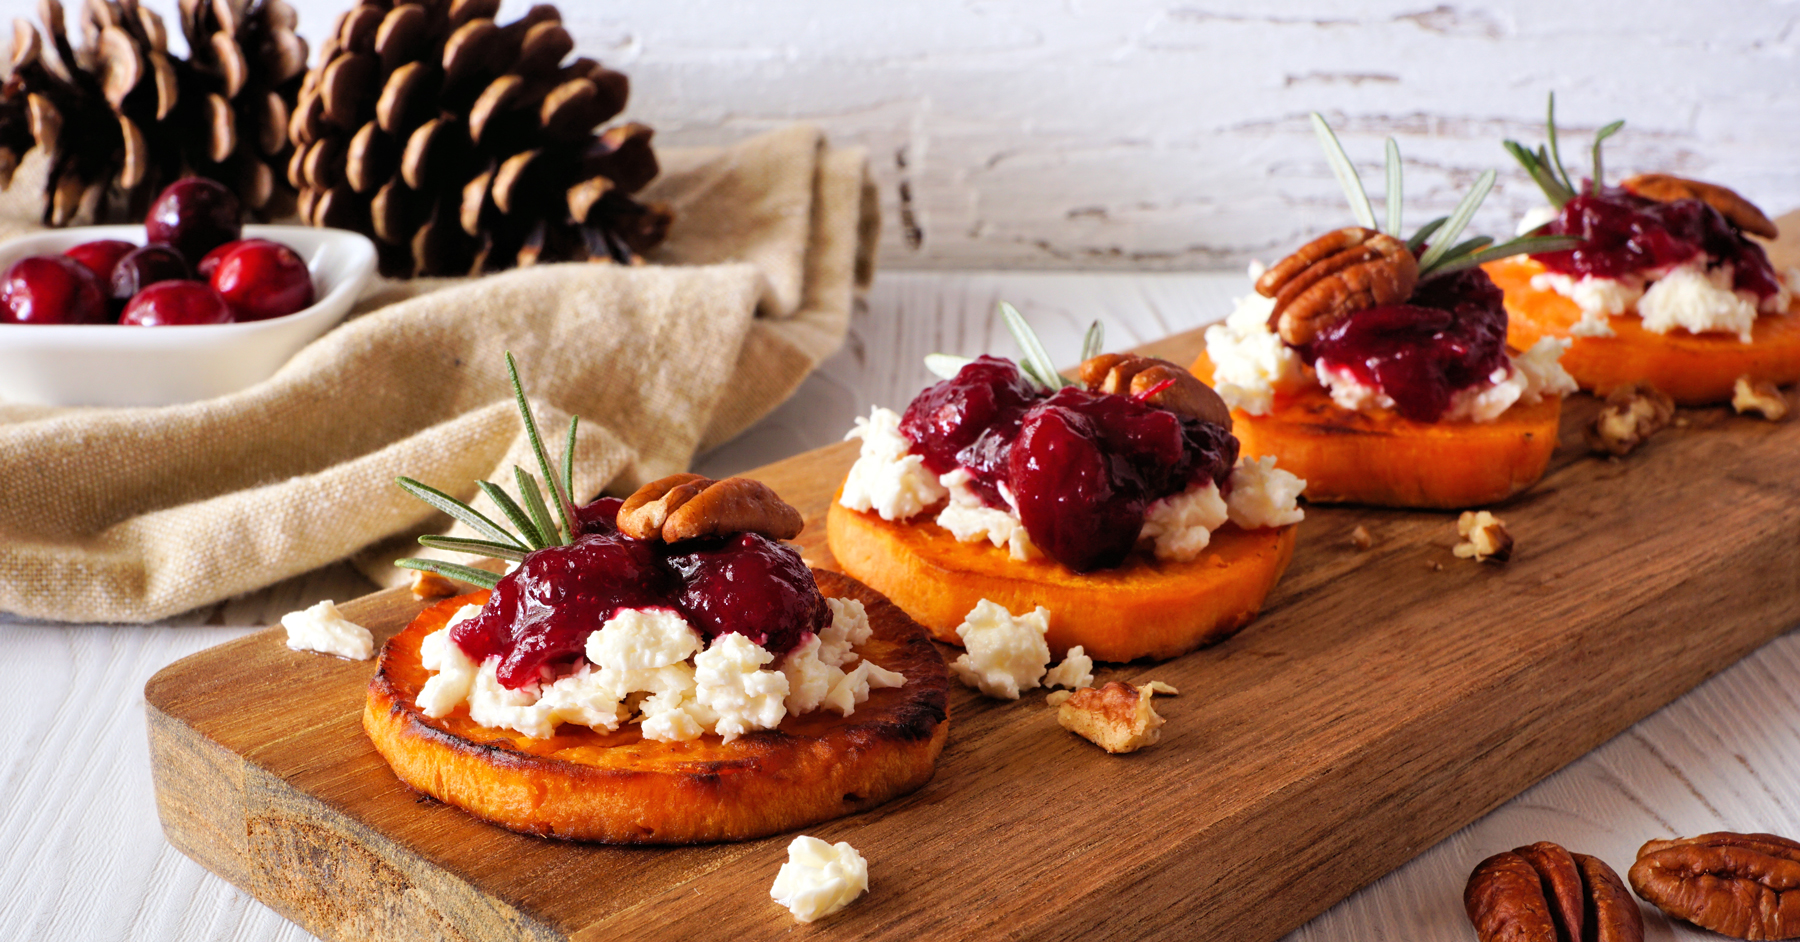 Deck the Halls with 2022 Holiday Food Trends